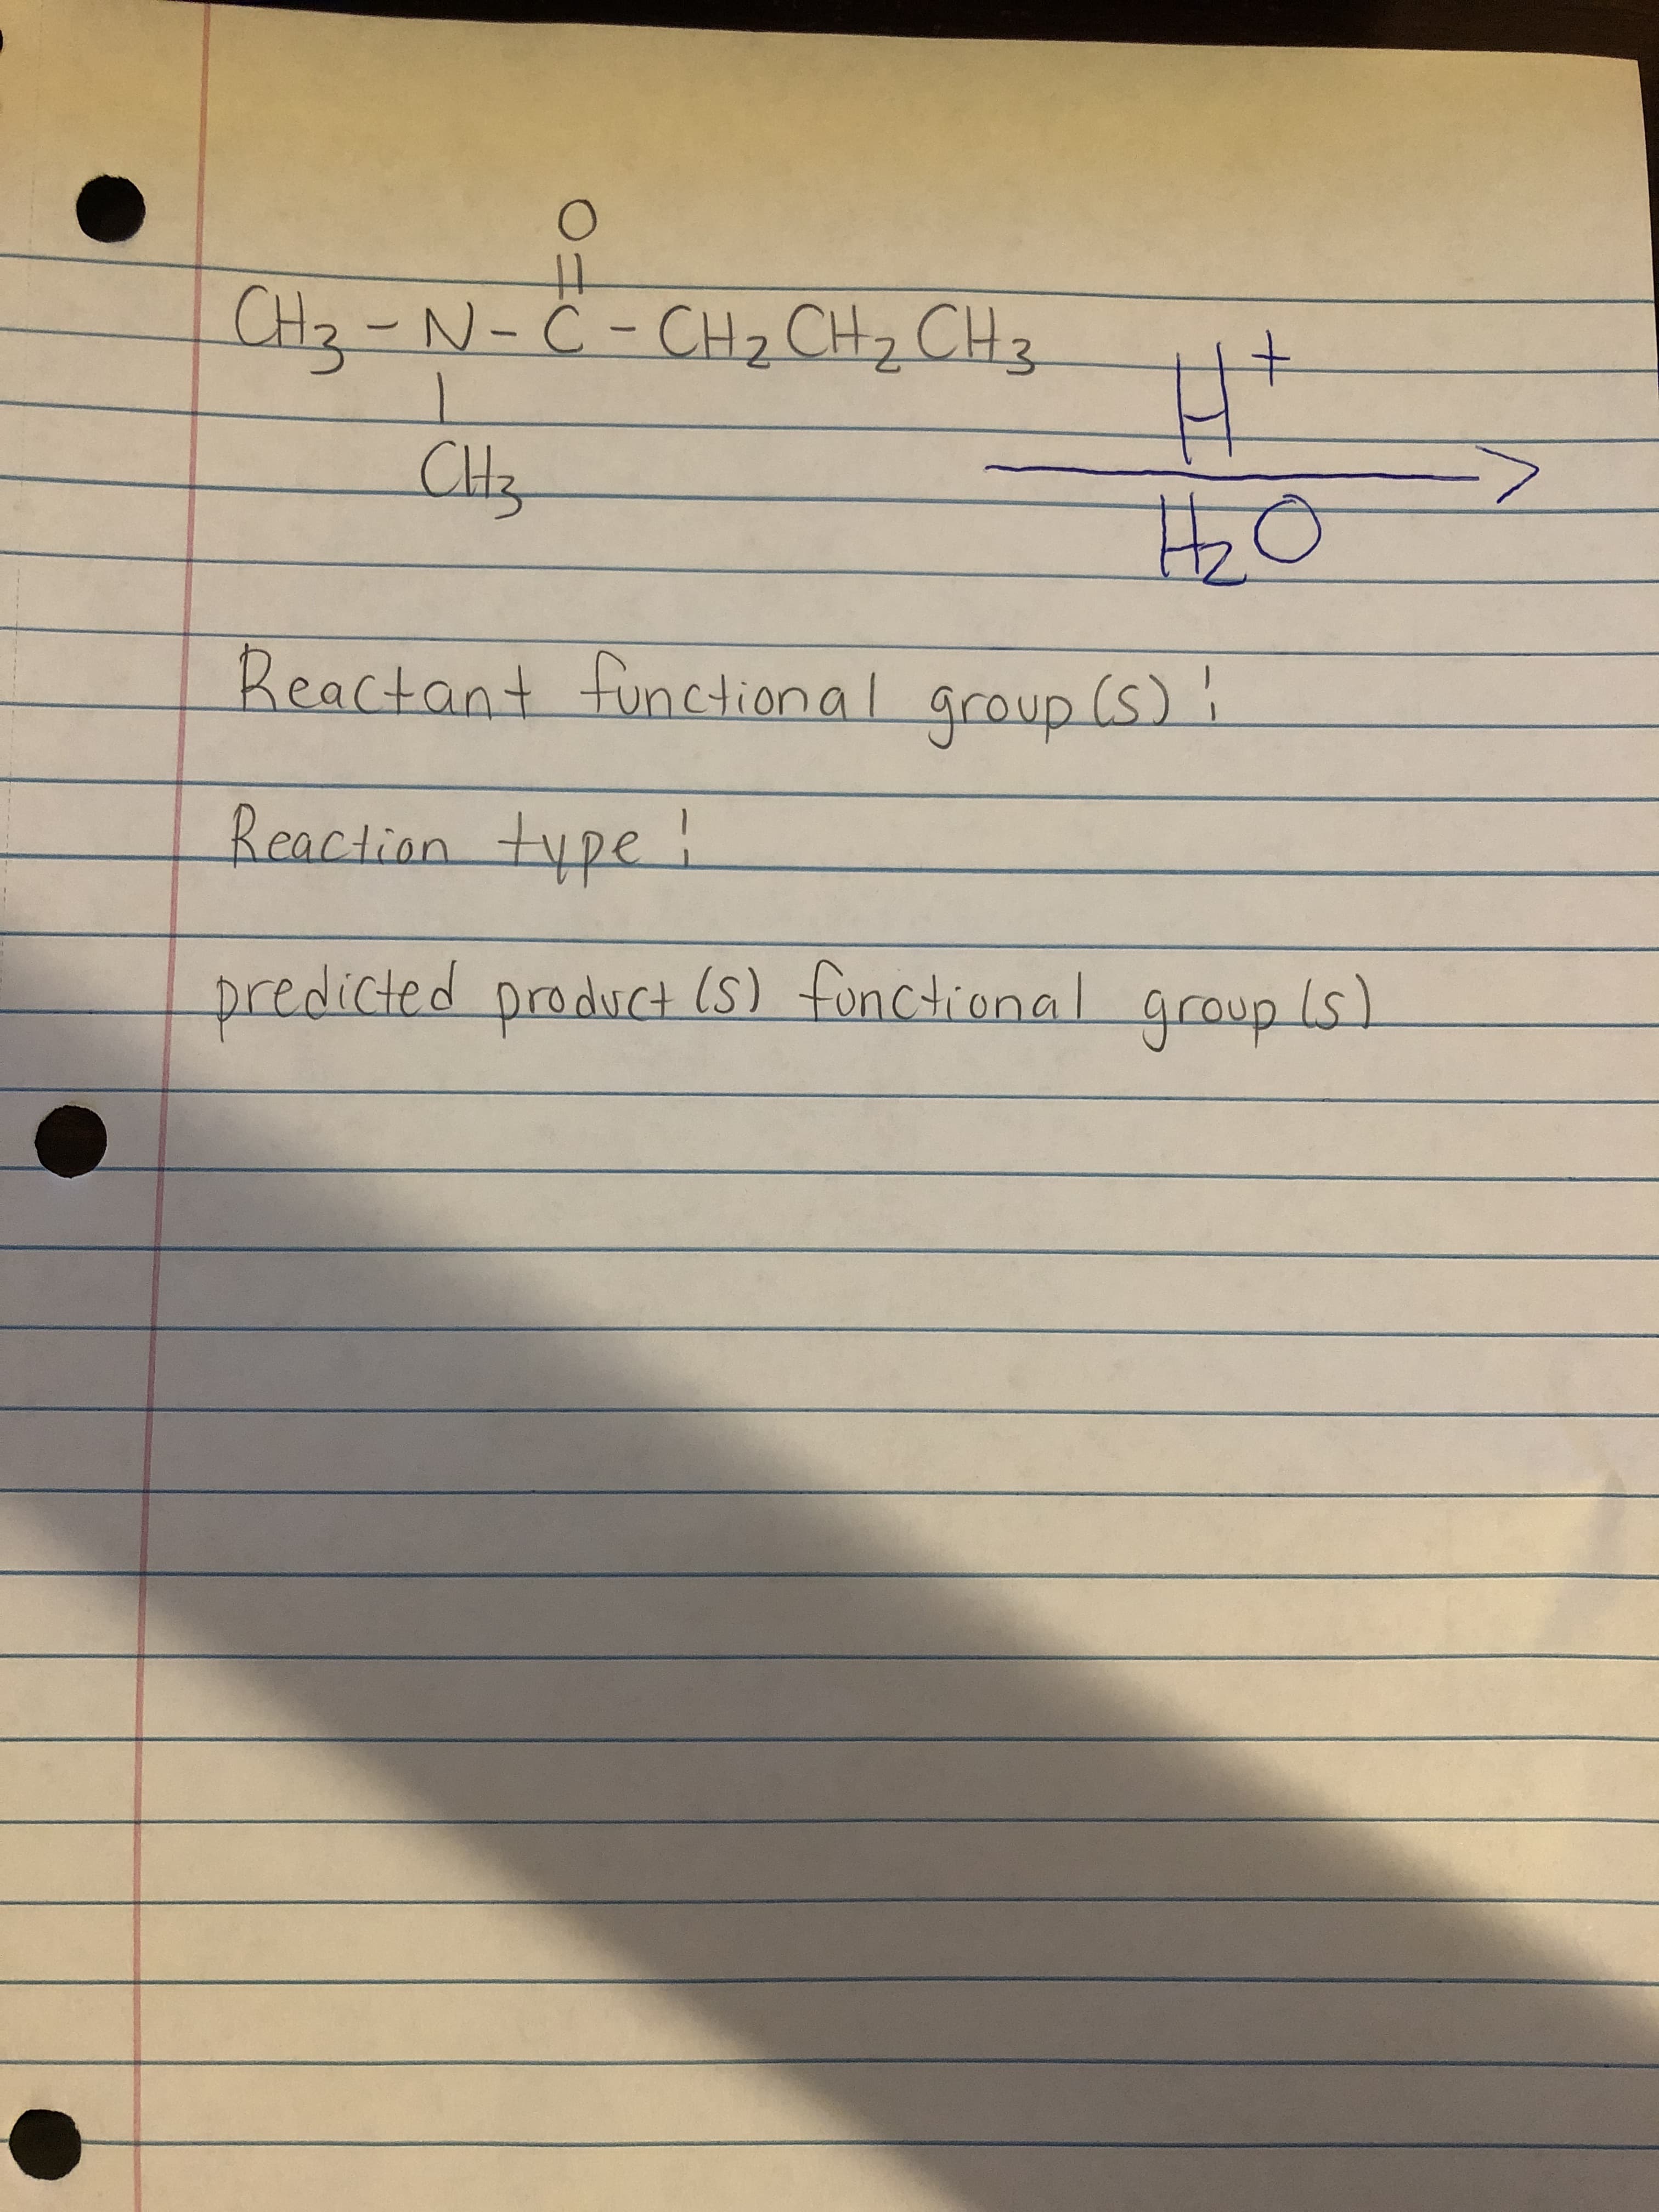 CH2-N-C-CH2 CH2 CH3
|
CH3
Reactant functiona l group (S):
Reaction
type
!
predicted grcoup Is)
prodiuct (s) fonctional
